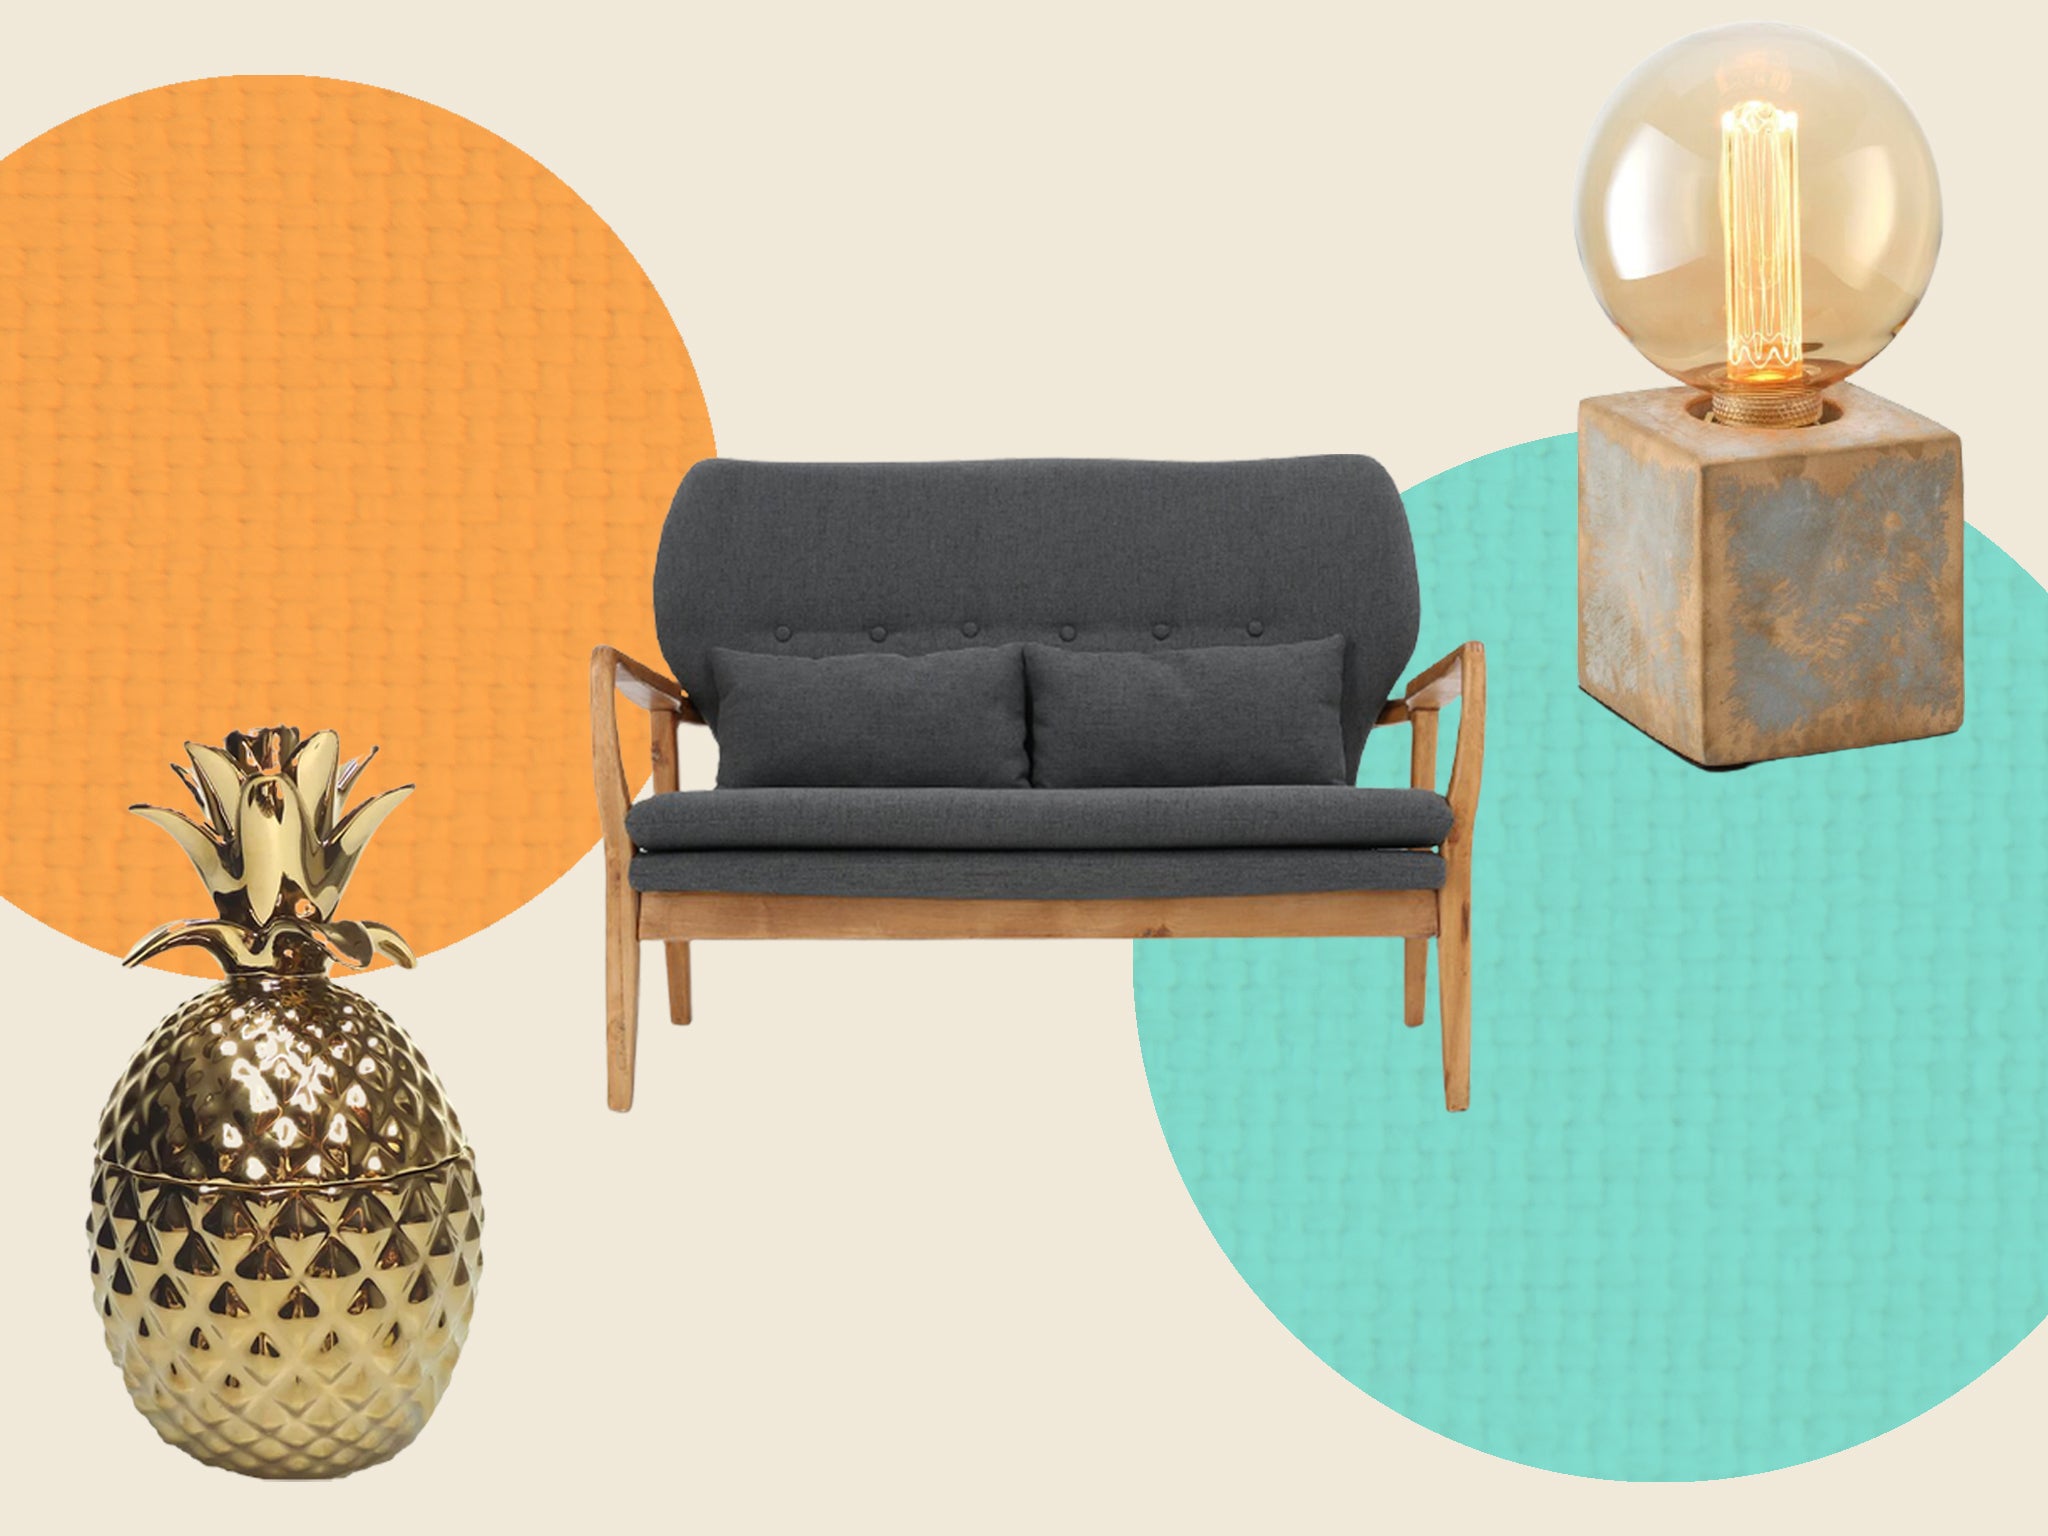 From furniture to lamps, Wayfair is going big this year